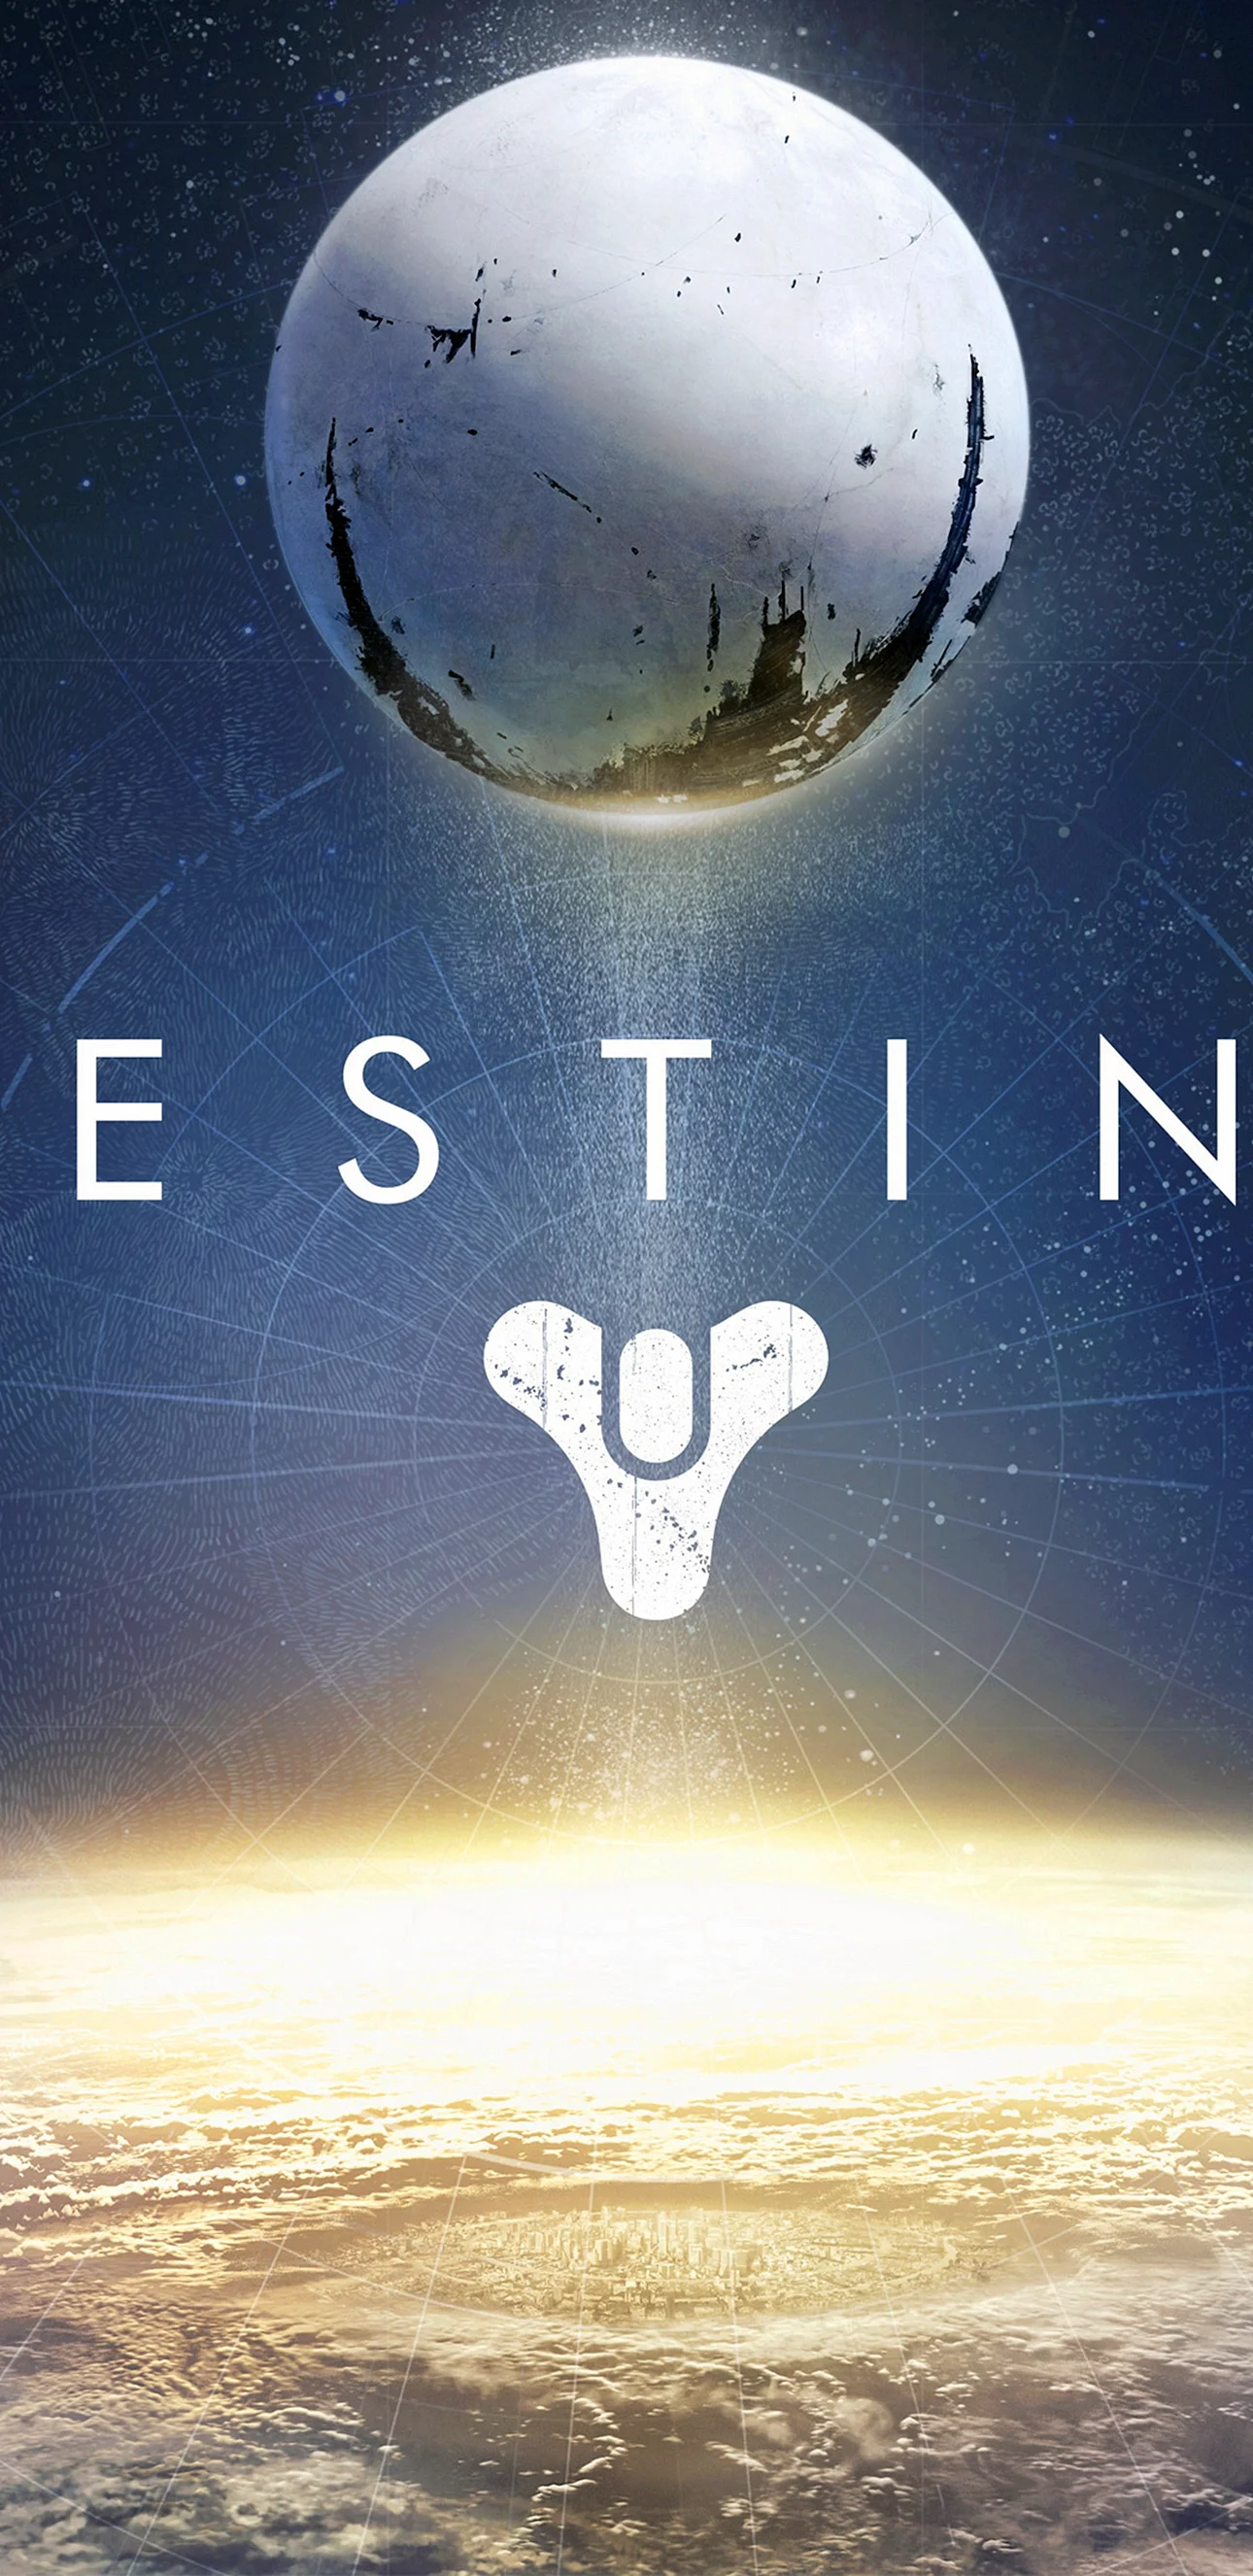 Destiny Poster Wallpaper For iPhone